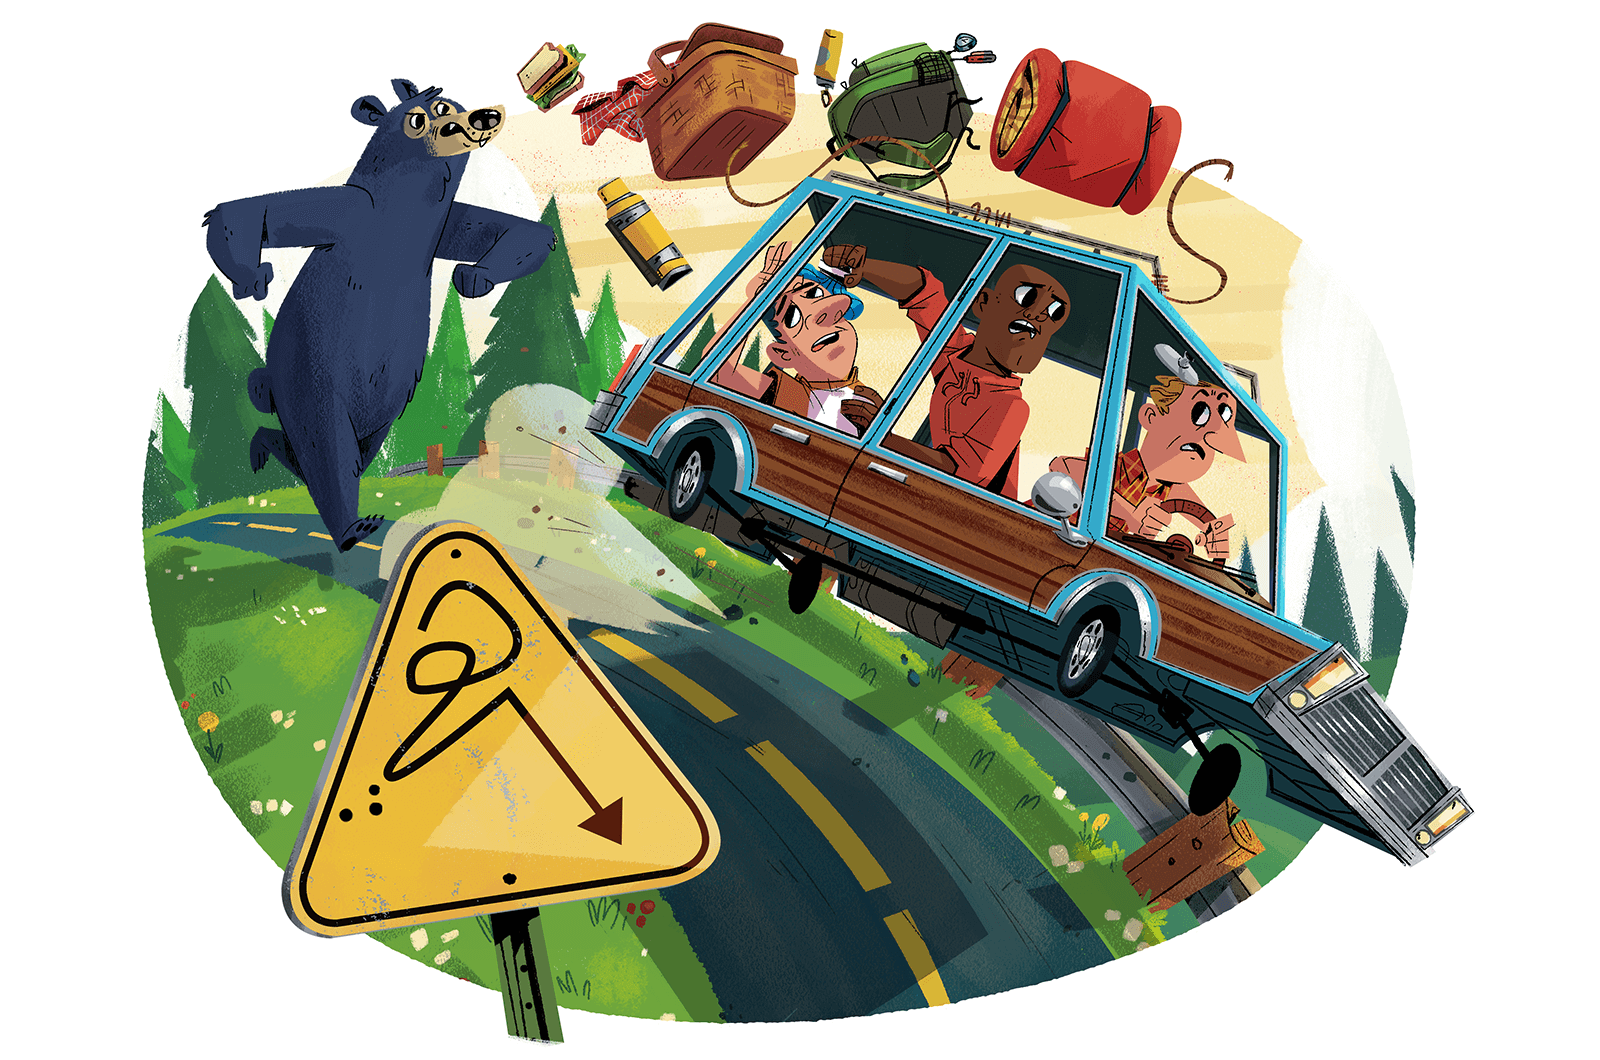 Illustration of a bear chasing car of people down the road